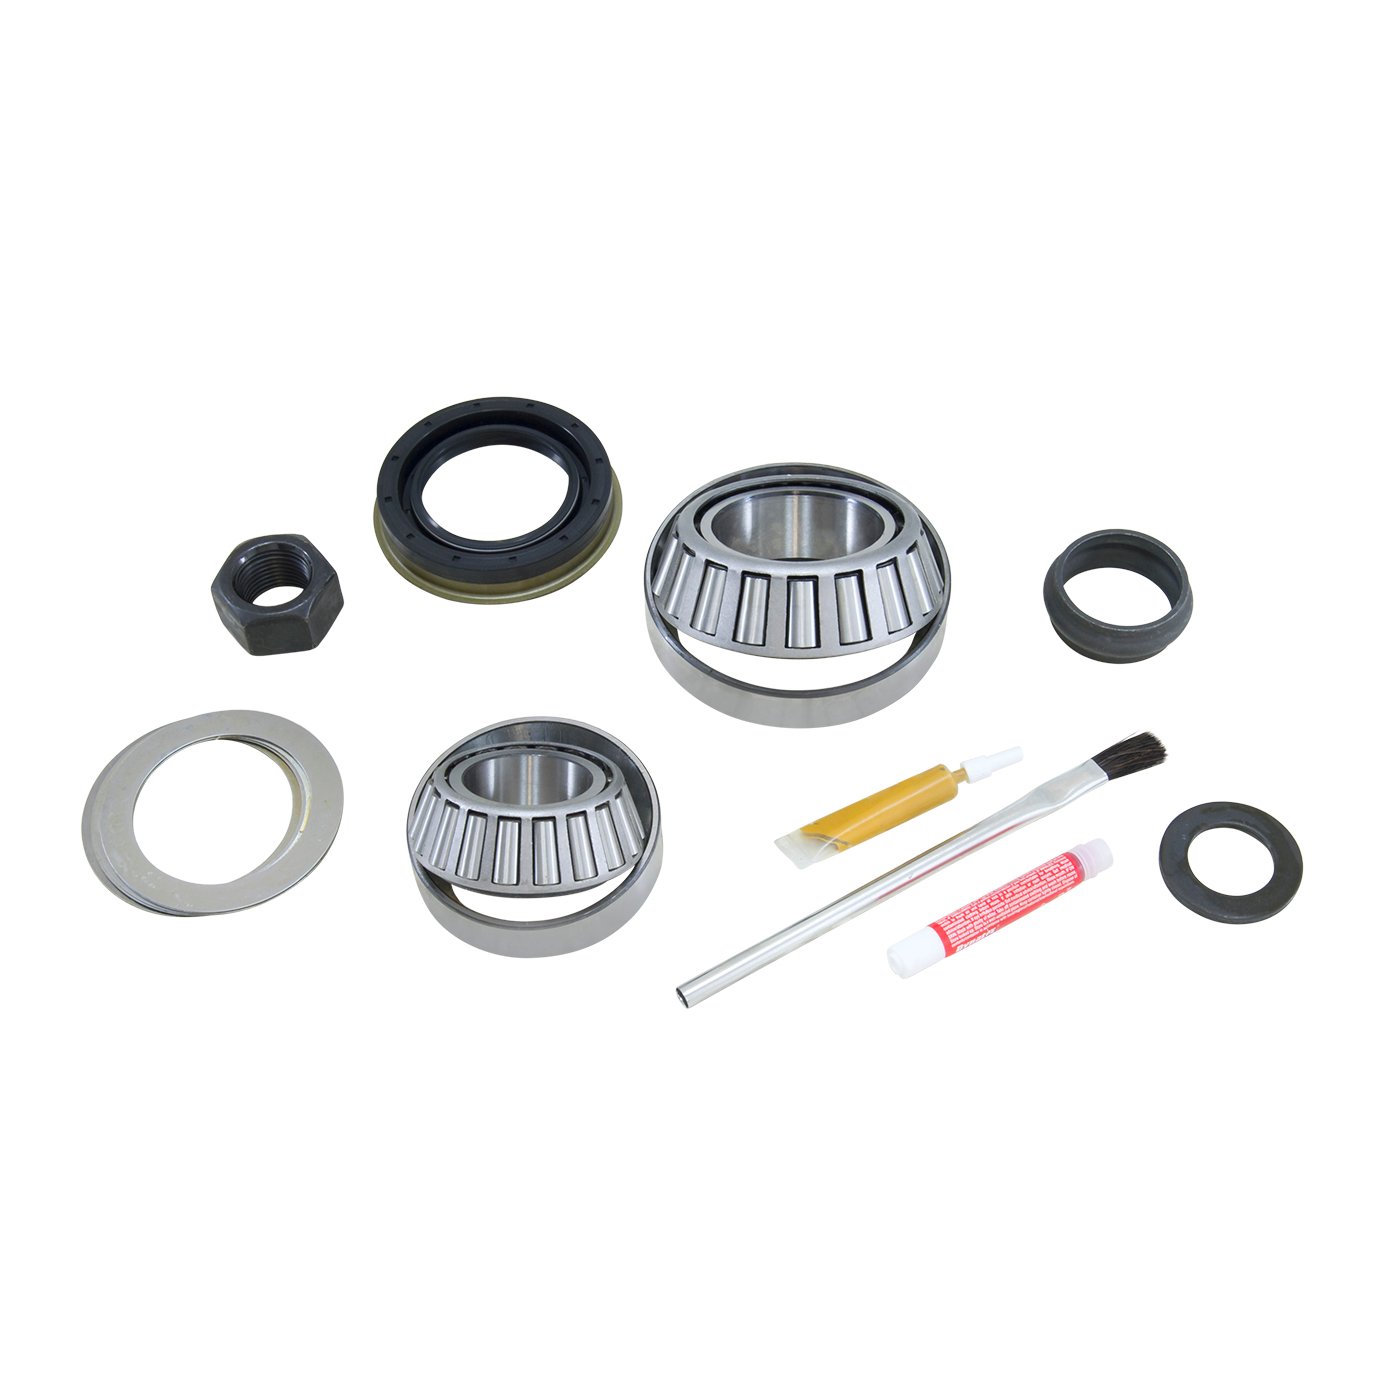 Pinion Install Kit For '11 & Up Chrysler 9.25 in. Zf Differential